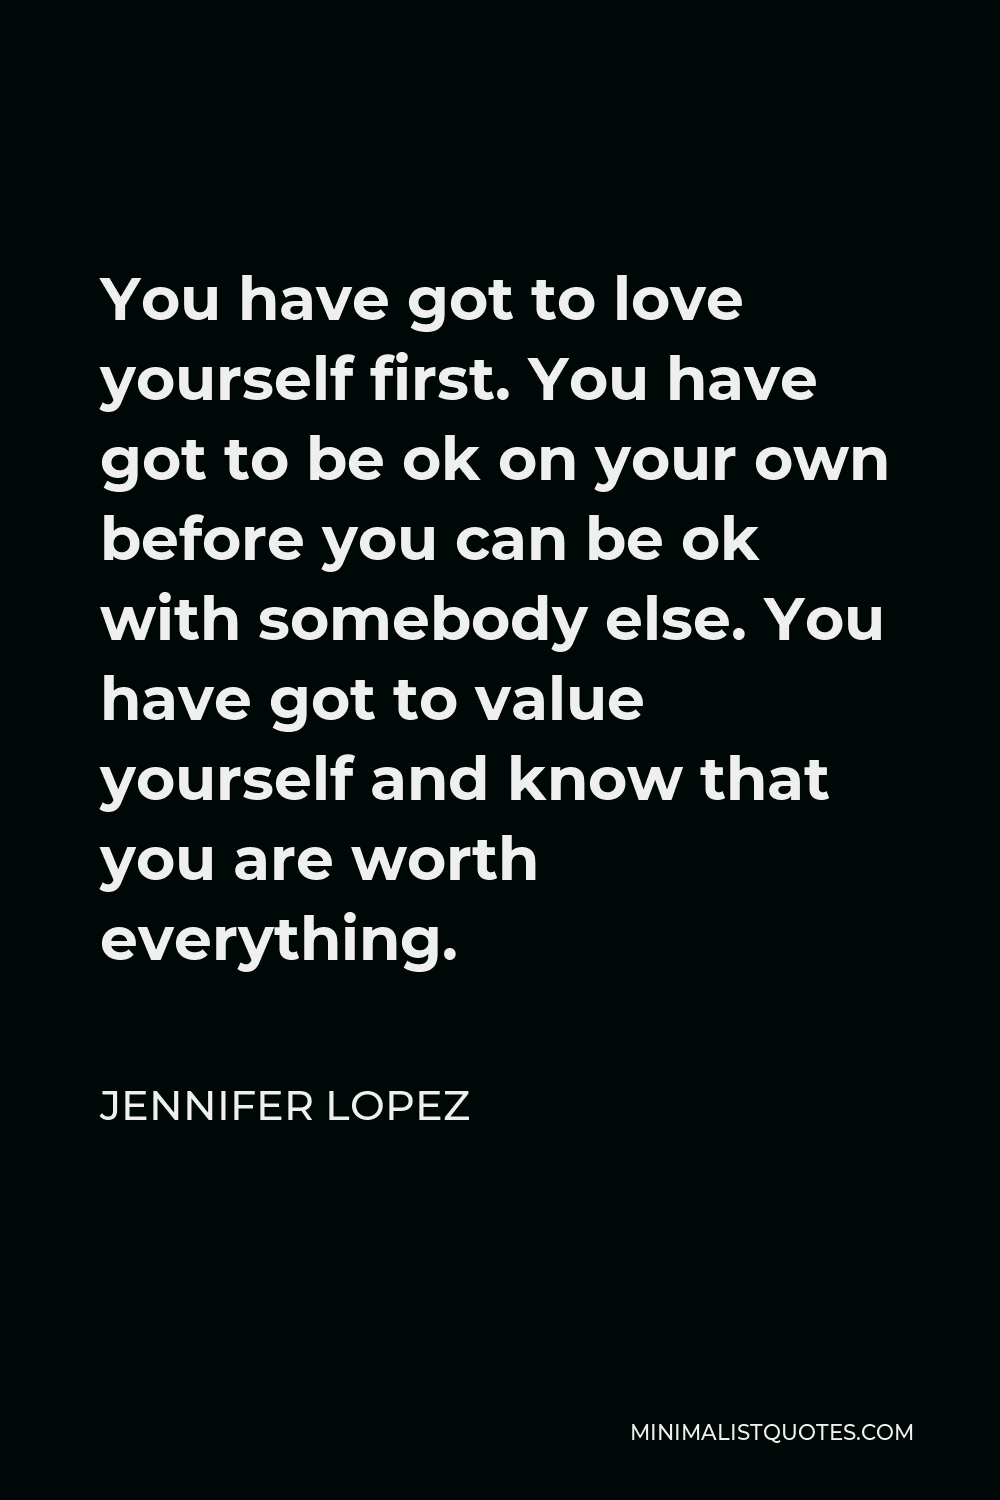 Jennifer Lopez Quote - You have got to love yourself first. You have got to be ok on your own before you can be ok with somebody else. You have got to value yourself and know that you are worth everything.